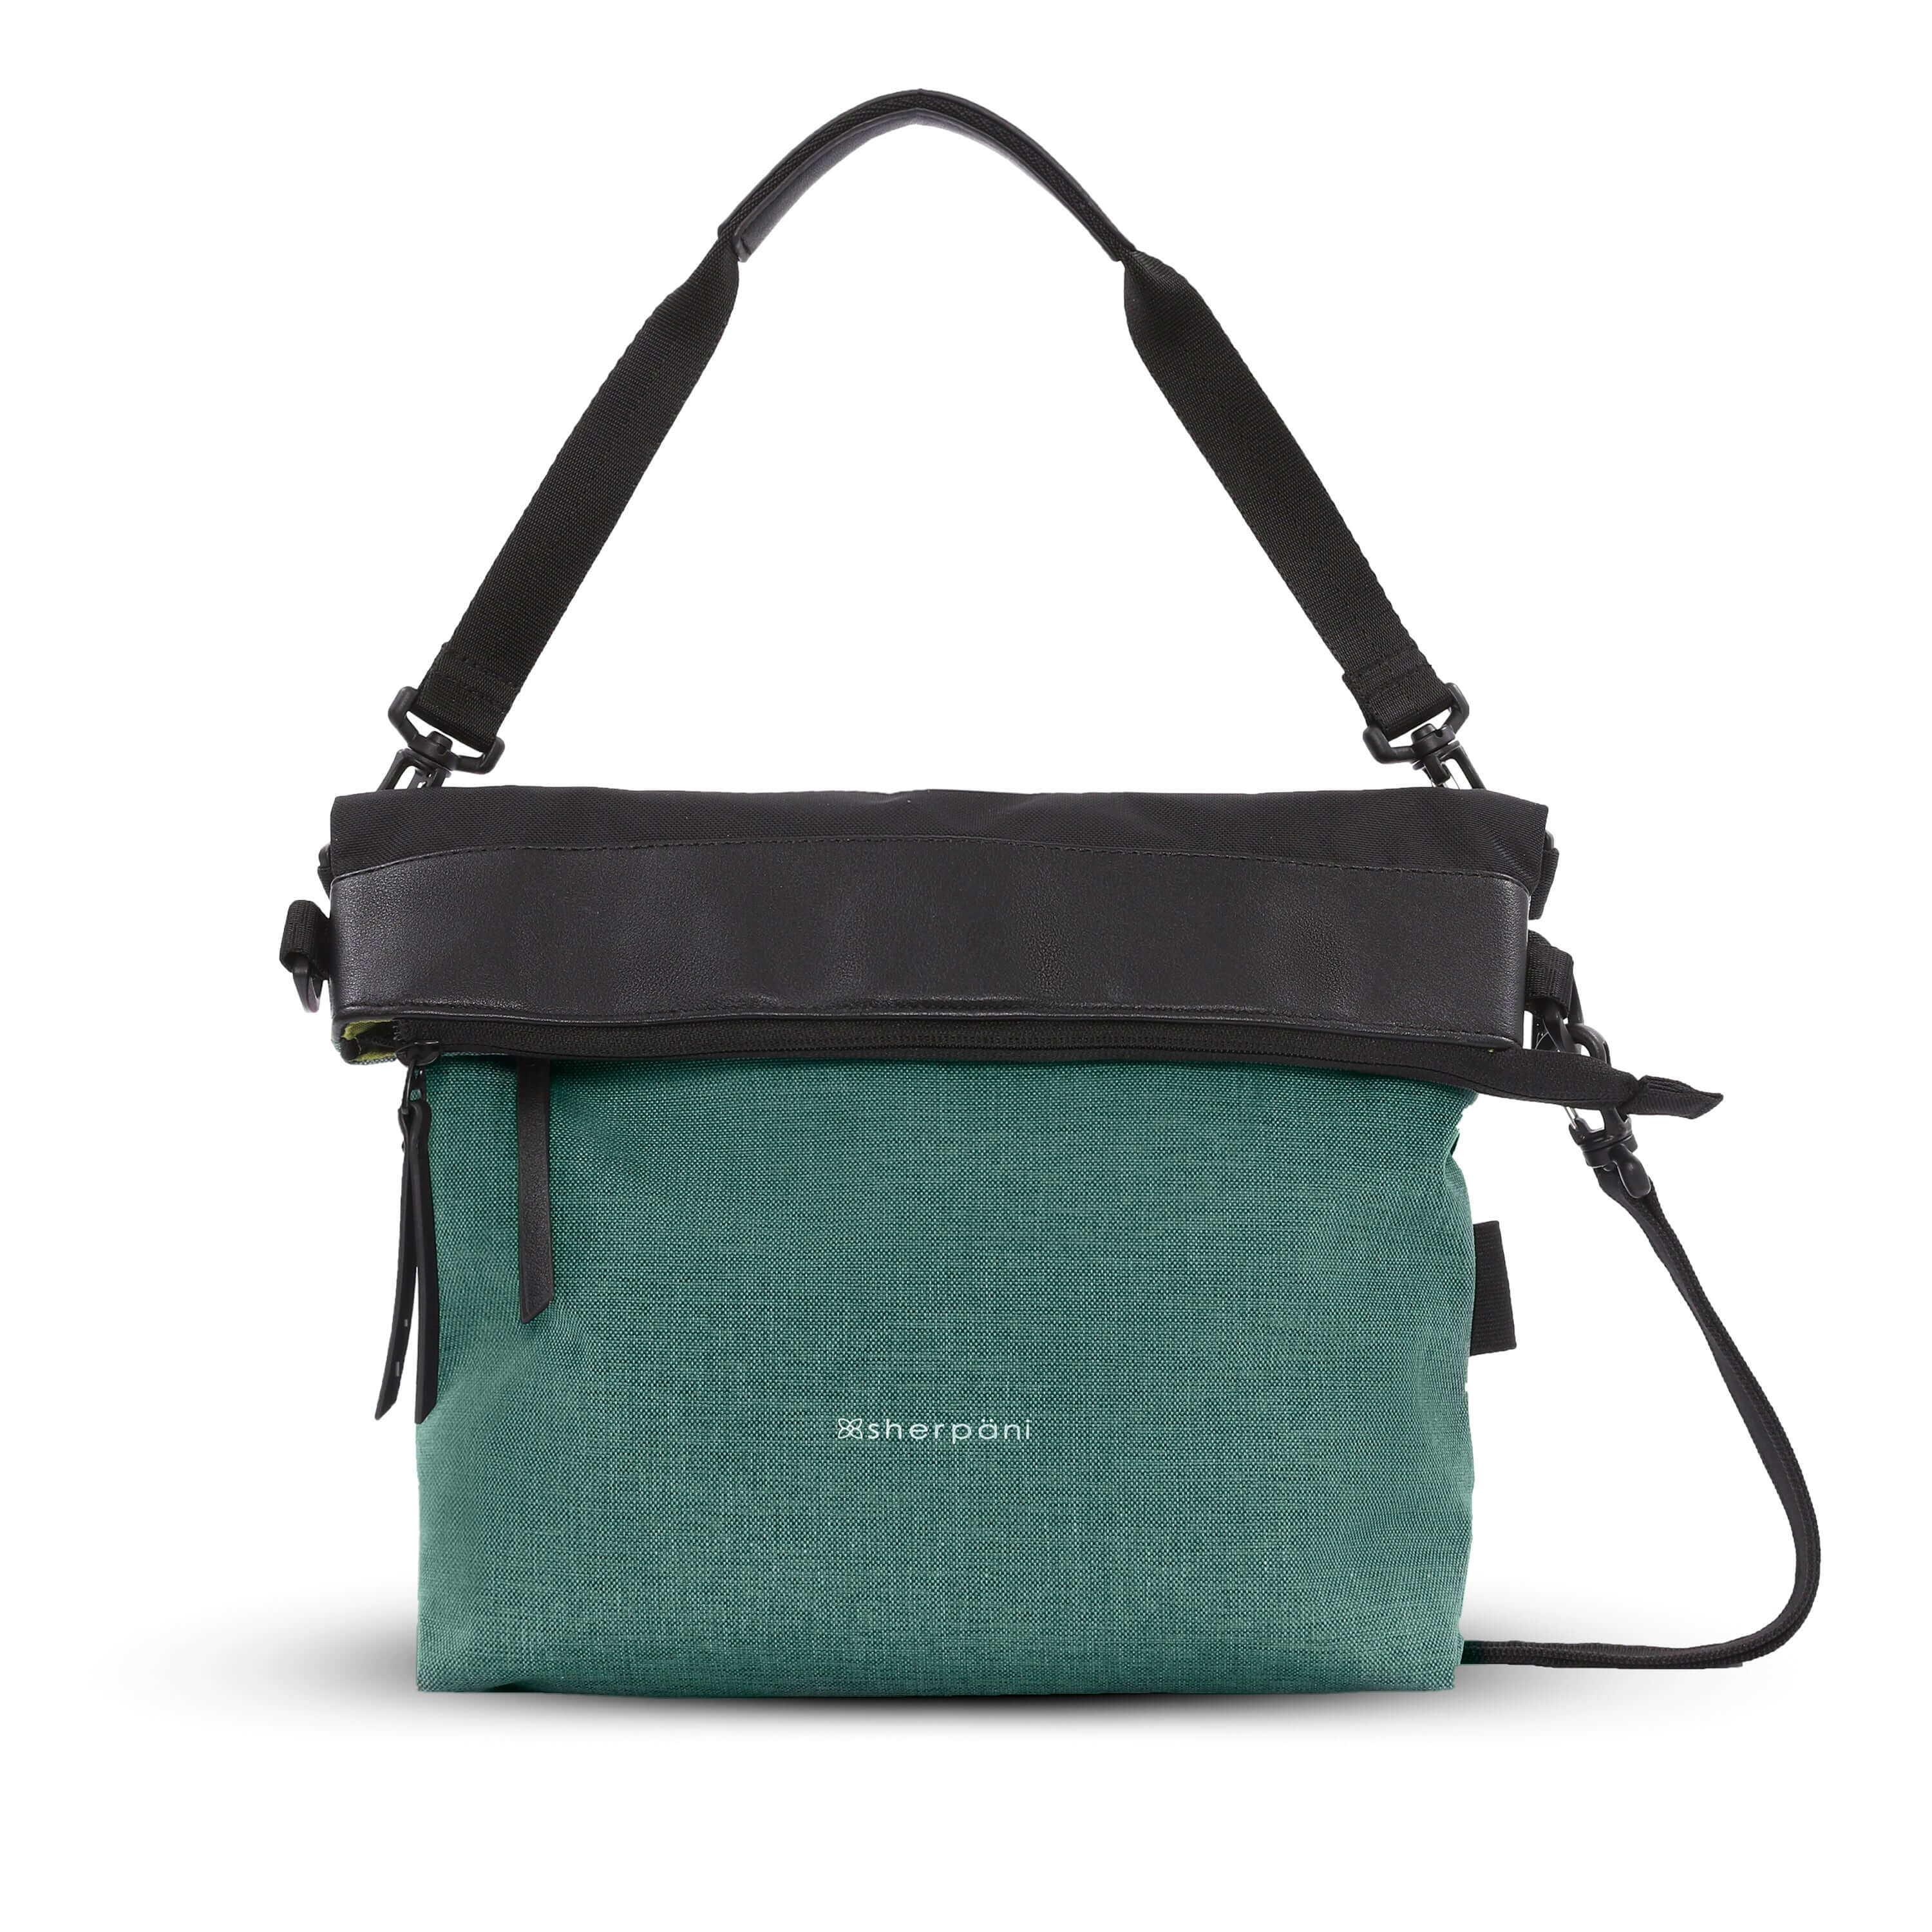 Flat front view of Sherpani's Anti-Theft bag, the Vale AT in Teal with vegan leather accents in black. The top is folded over creating a two-toned reversible overlap. It has an adjustable/detachable crossbody strap, and a second detachable strap fixed at a shorter length.